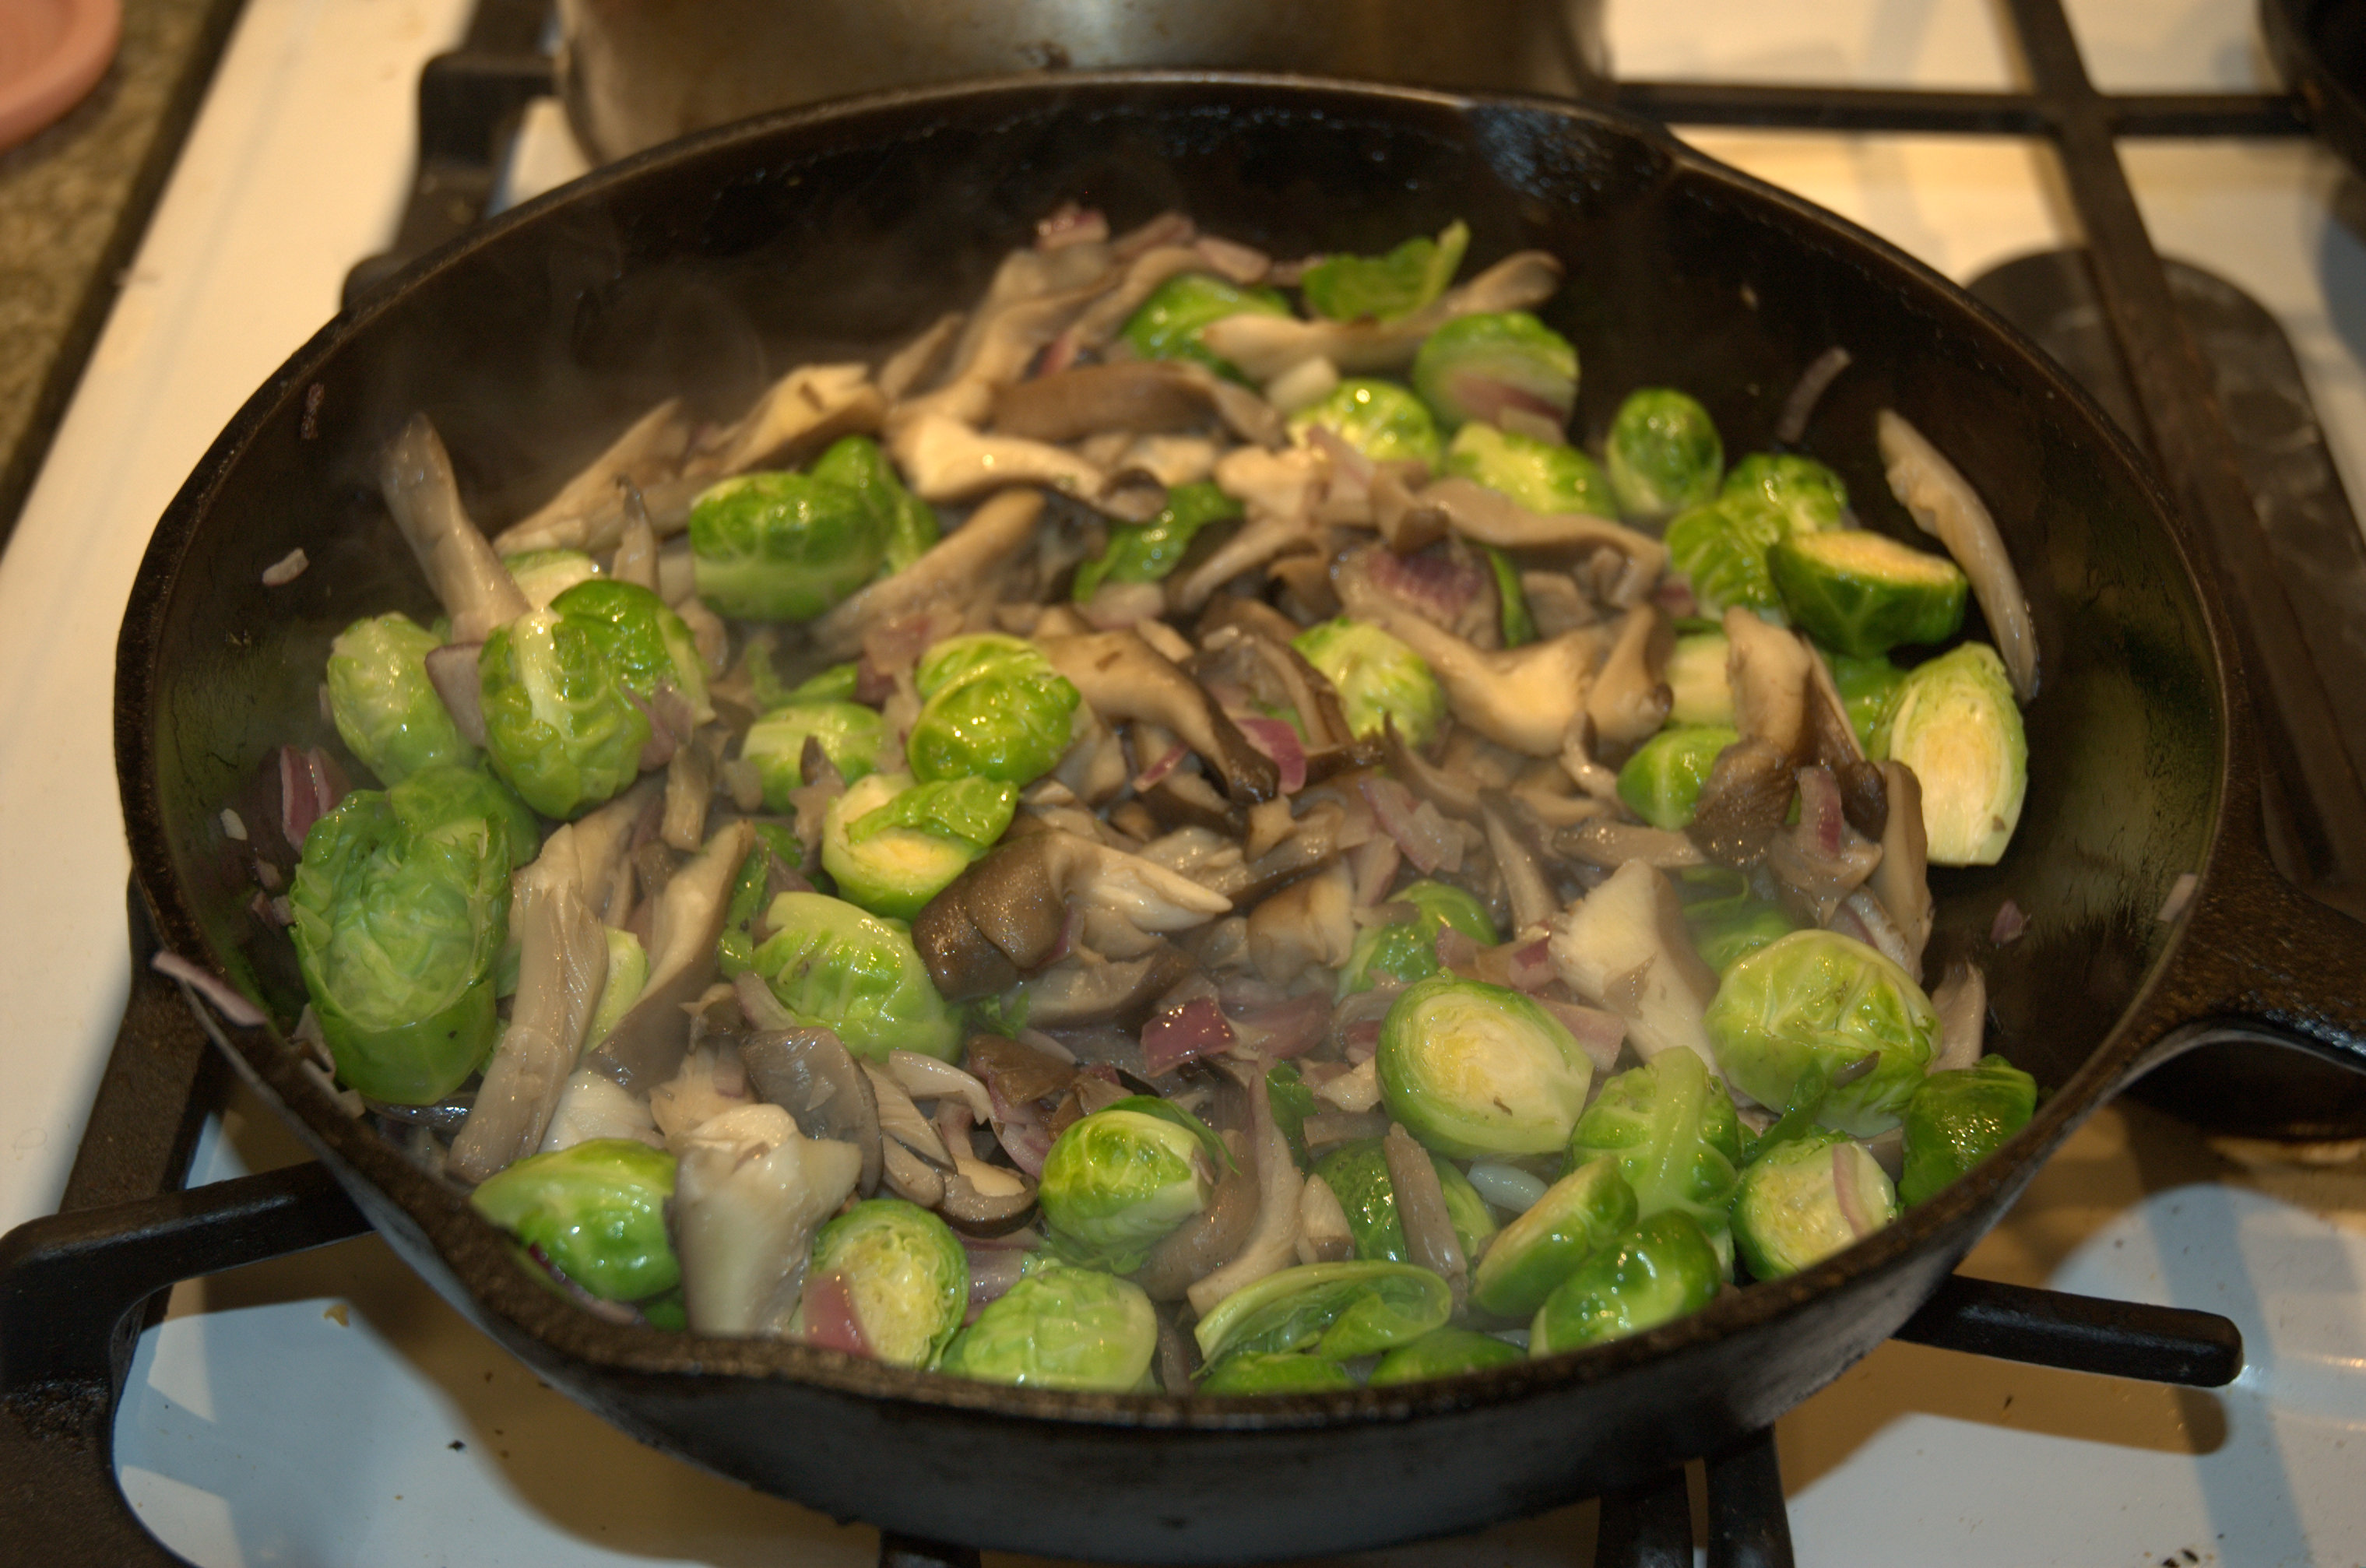 Braised-Brussels-sprouts-ila